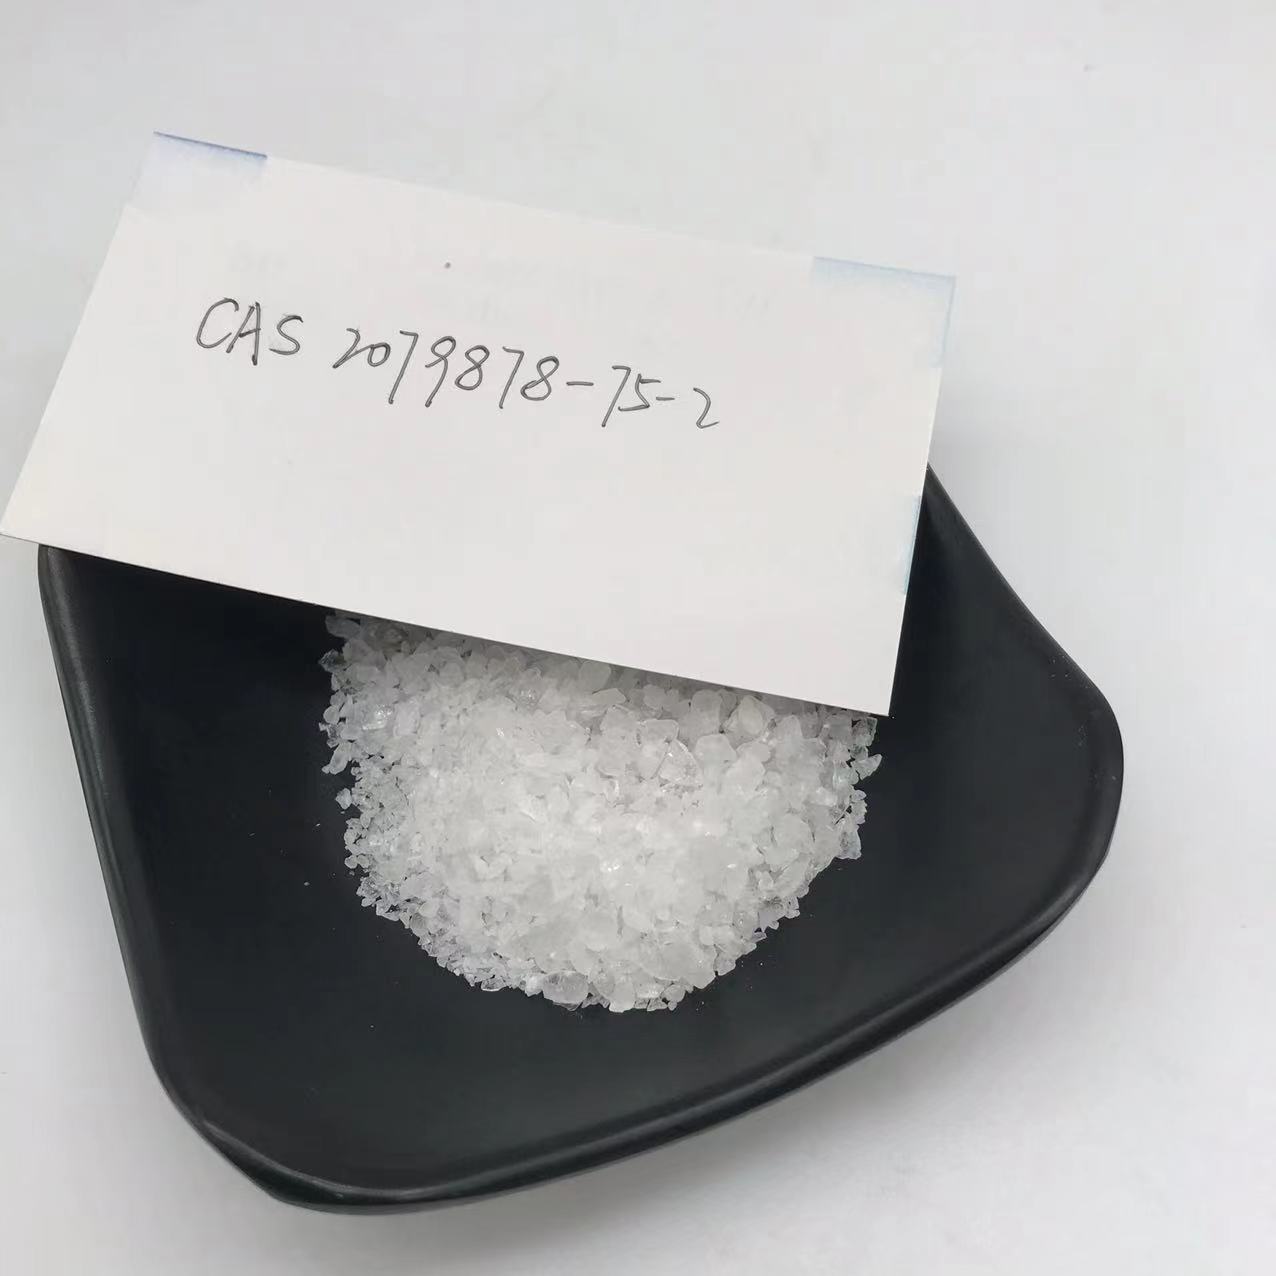 100% Passing 2- (2-Chlorophenyl) -2-Nitrocyclohexanone Powder CAS 2079878-75-2 with High Quality